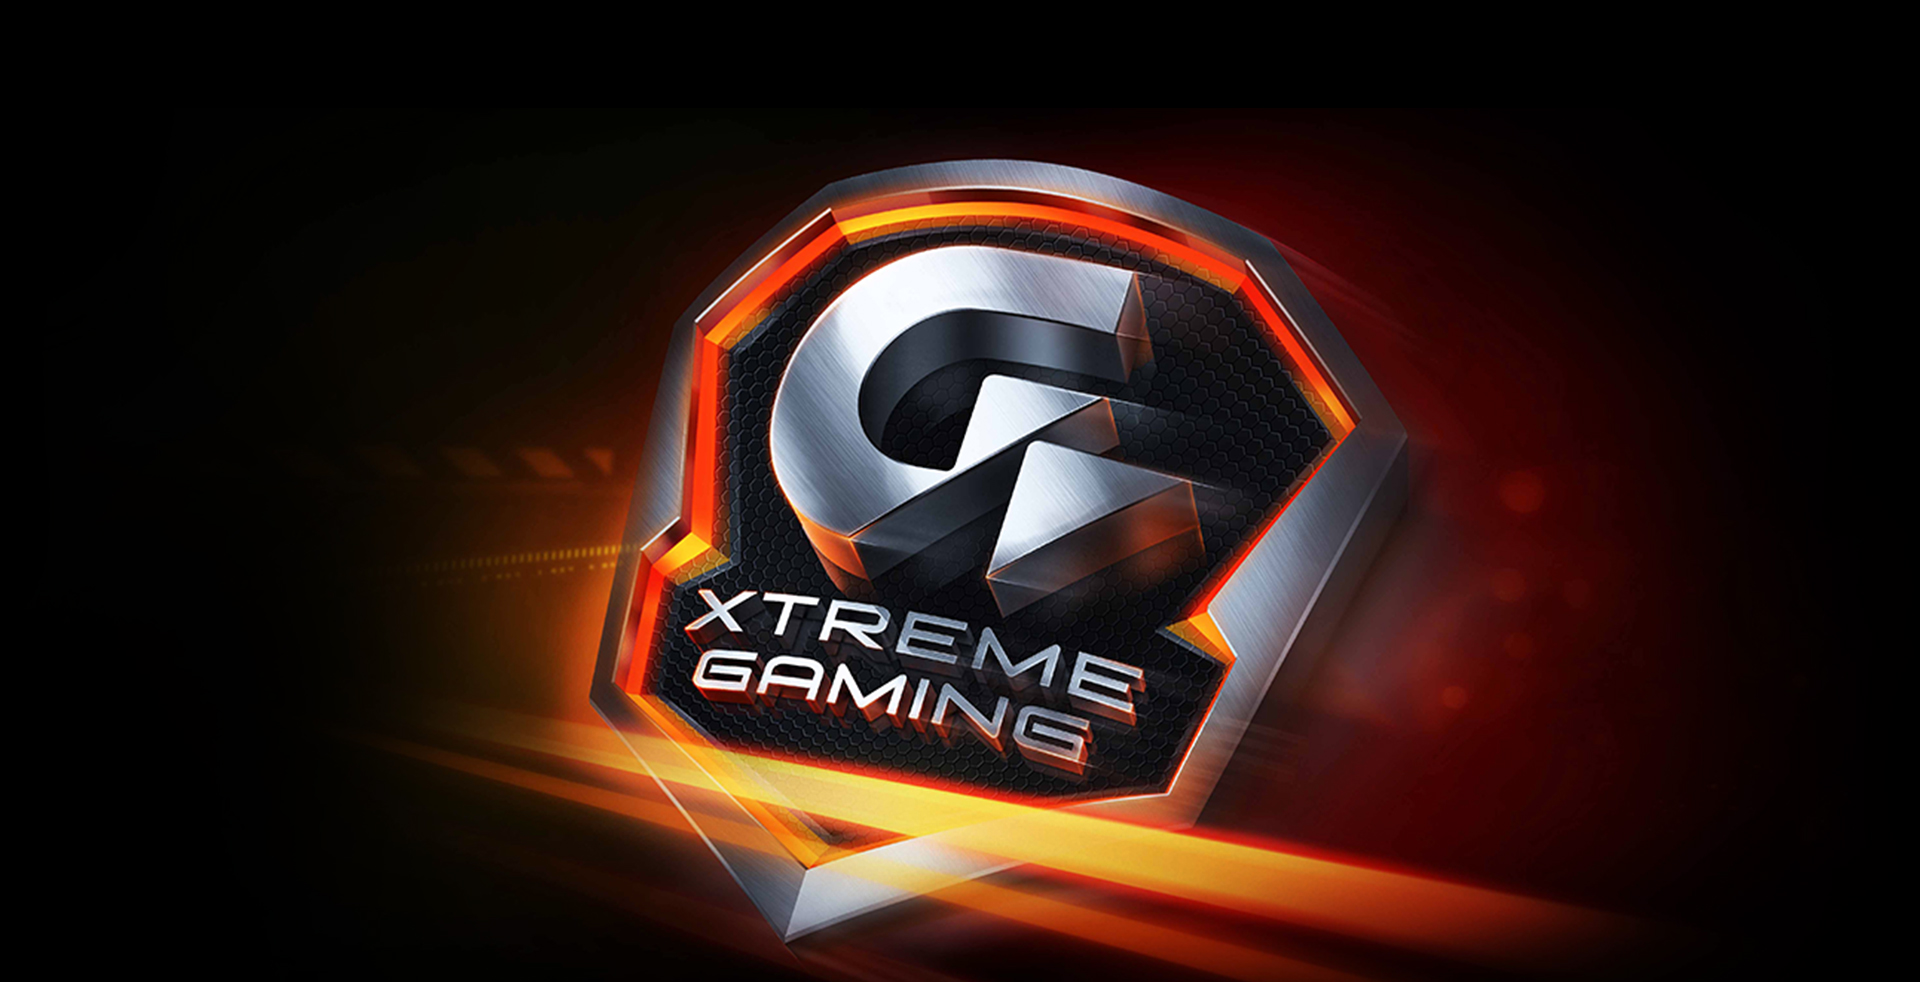 Media asset in full size related to 3dfxzone.it news item entitled as follows: GIGABYTE lancia la card factory-overclocked GeForce GTX 960 Xtreme Gaming | Image Name: news24021_GIGABYTE-GeForce-GTX-960-Xtreme-Gaming_6.jpg